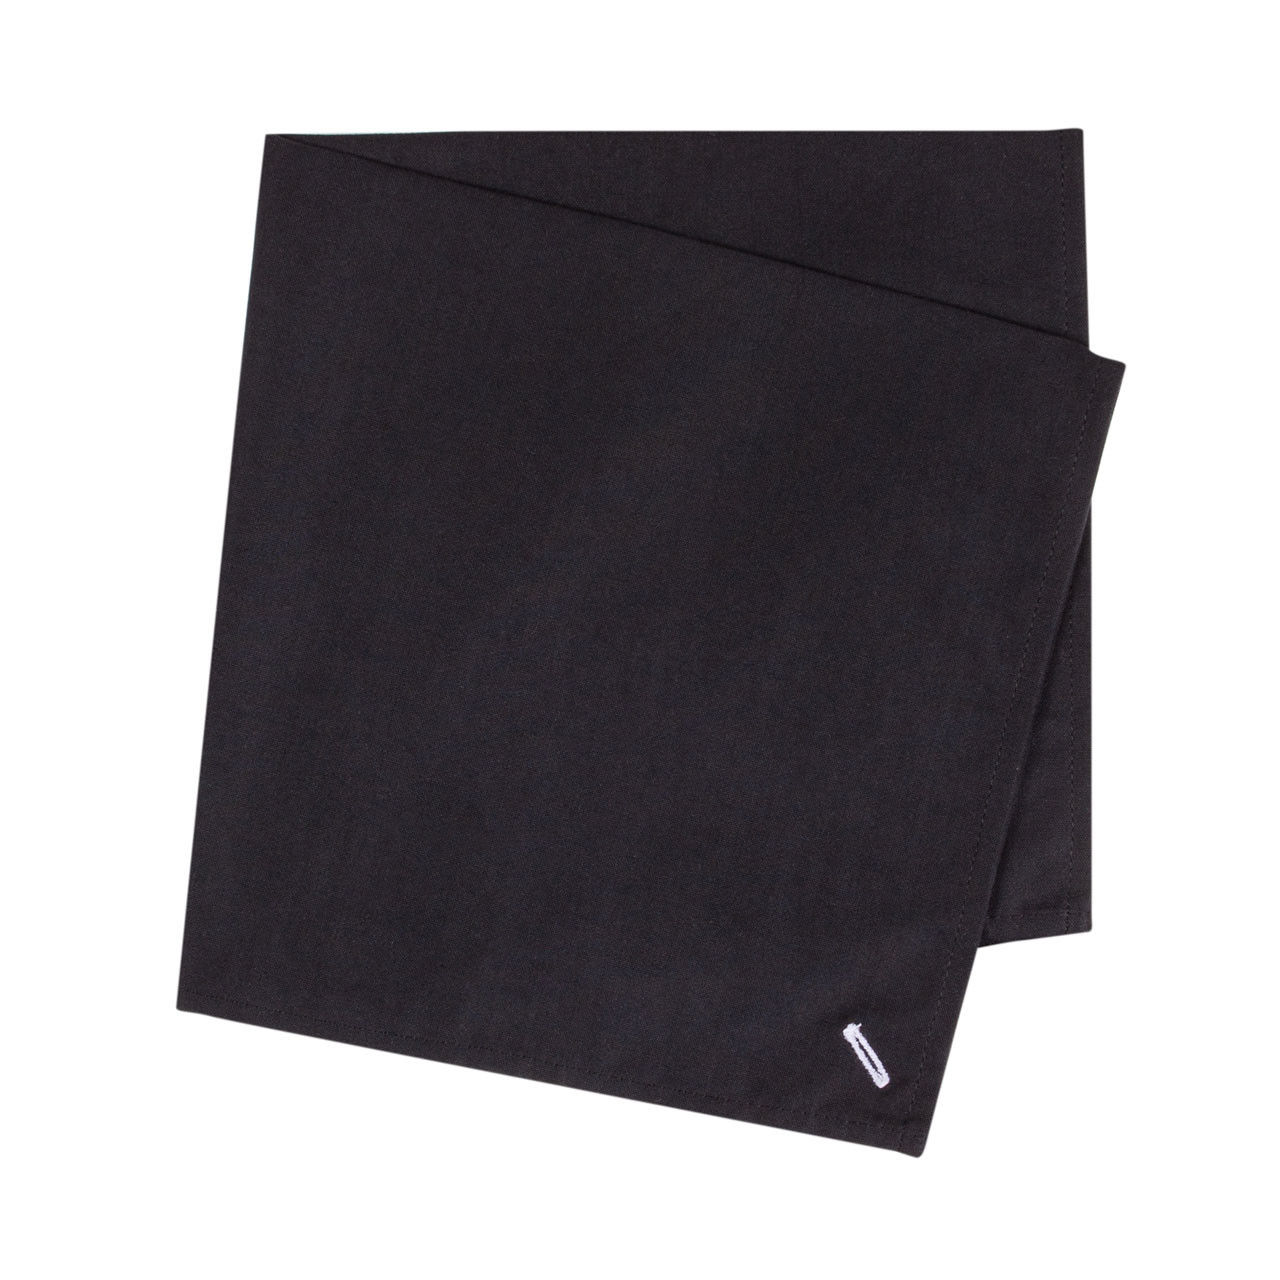 What's the fabric and weight of the Signature Plus Button Hole Napkins?